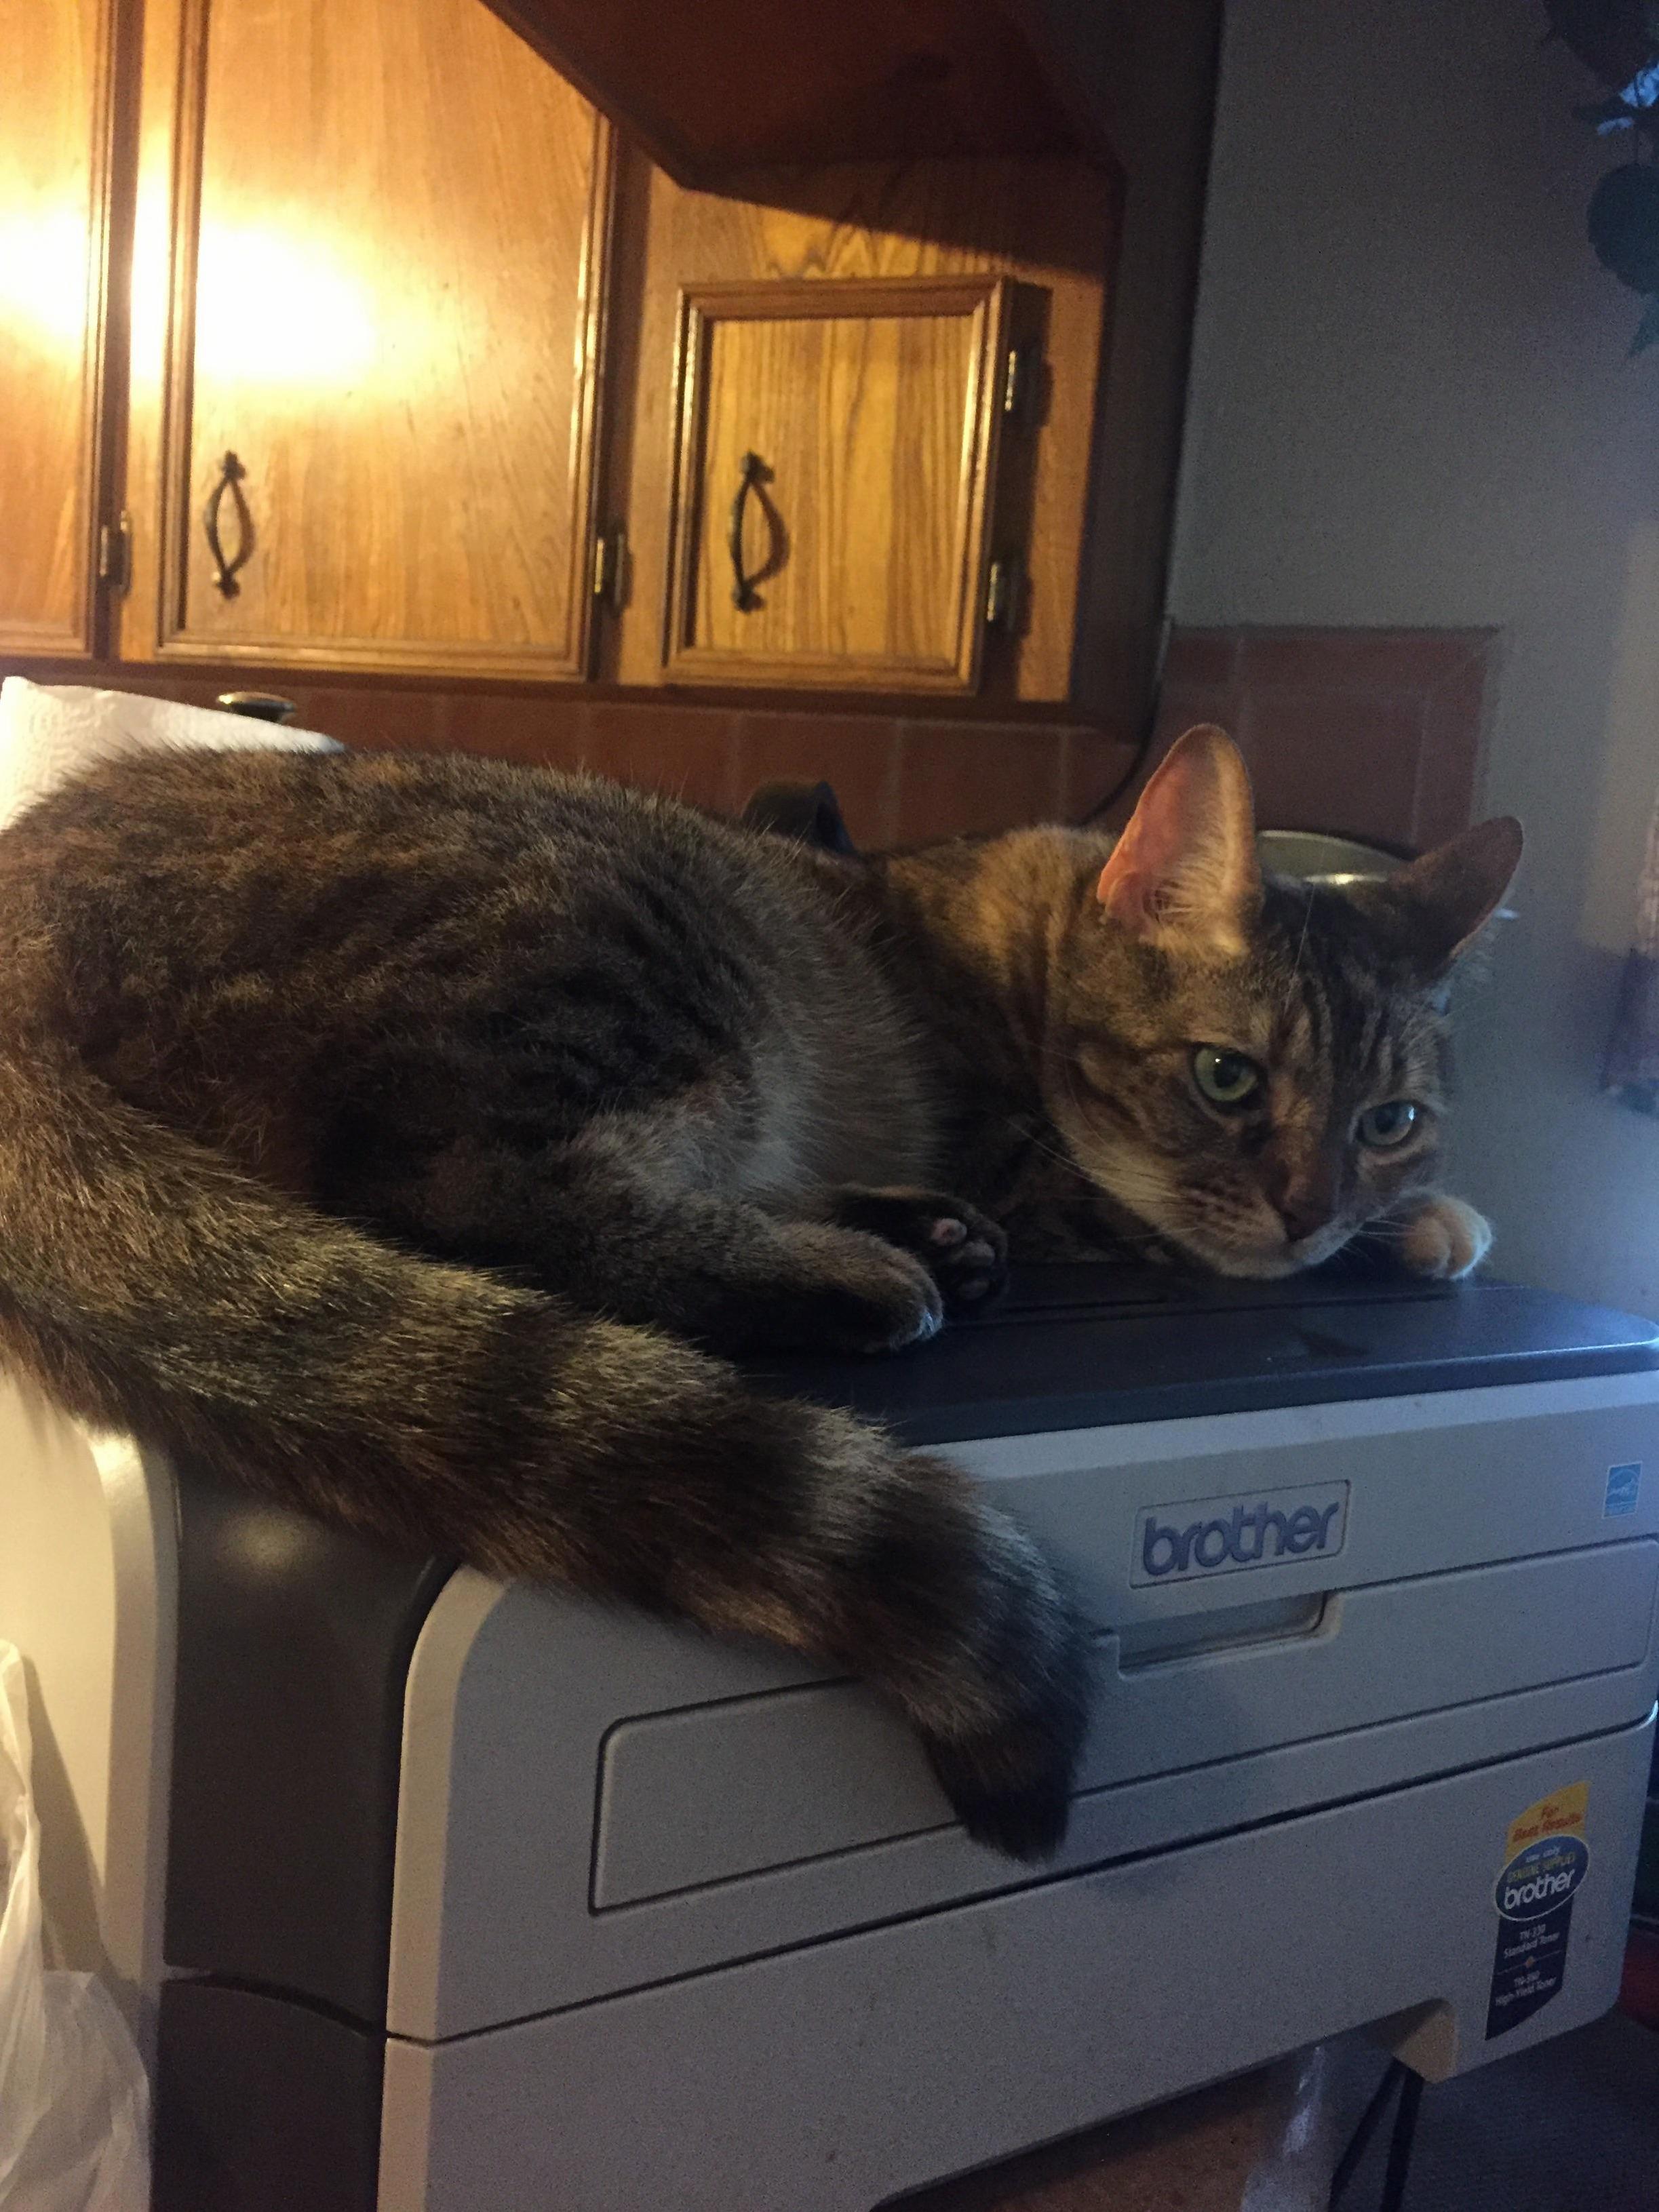 Turns out this printer is a cat bed.